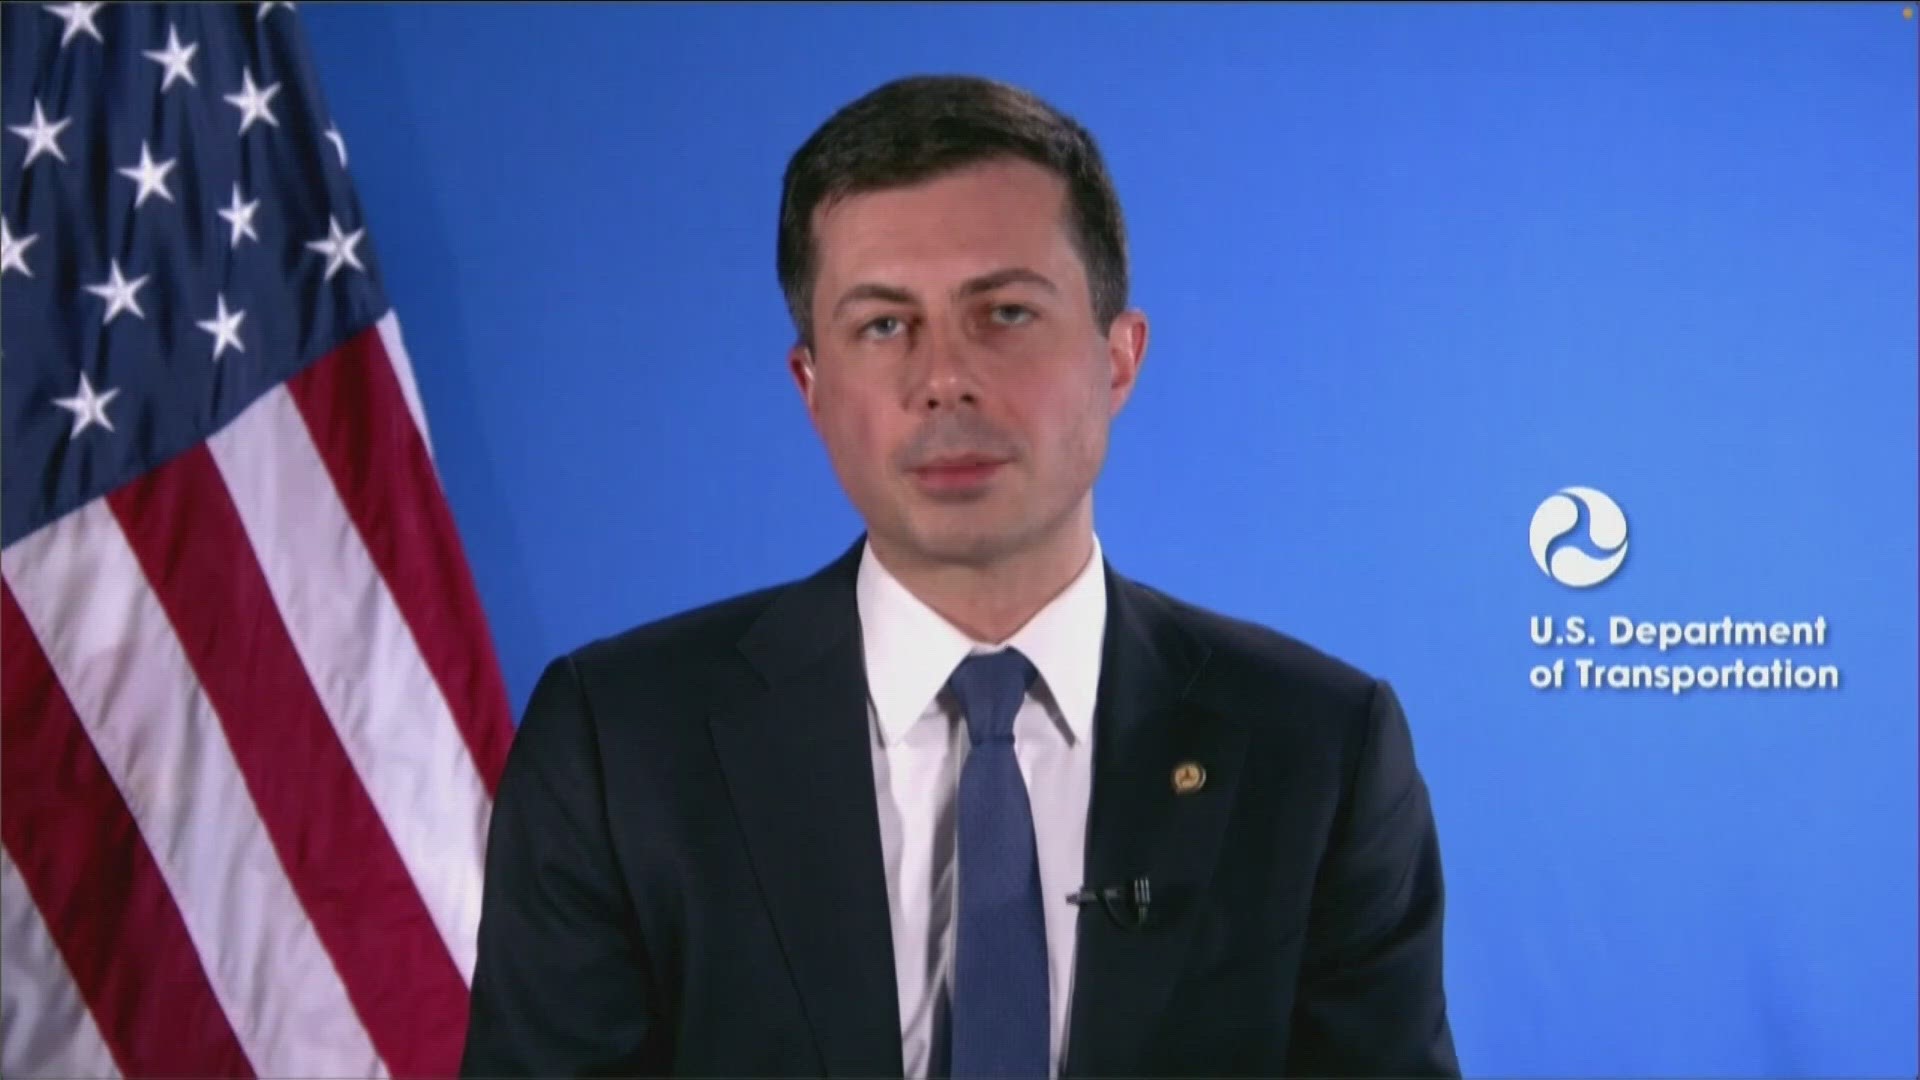 TRANSPORTATION SECRETARY PETE BUTTIGIEG IS COMING TO BUFFALO TOMORROW TO DISCUSS THE PROJECT TO COVER A PORTION OF THE KENSINGTON EXPRESSWAY.